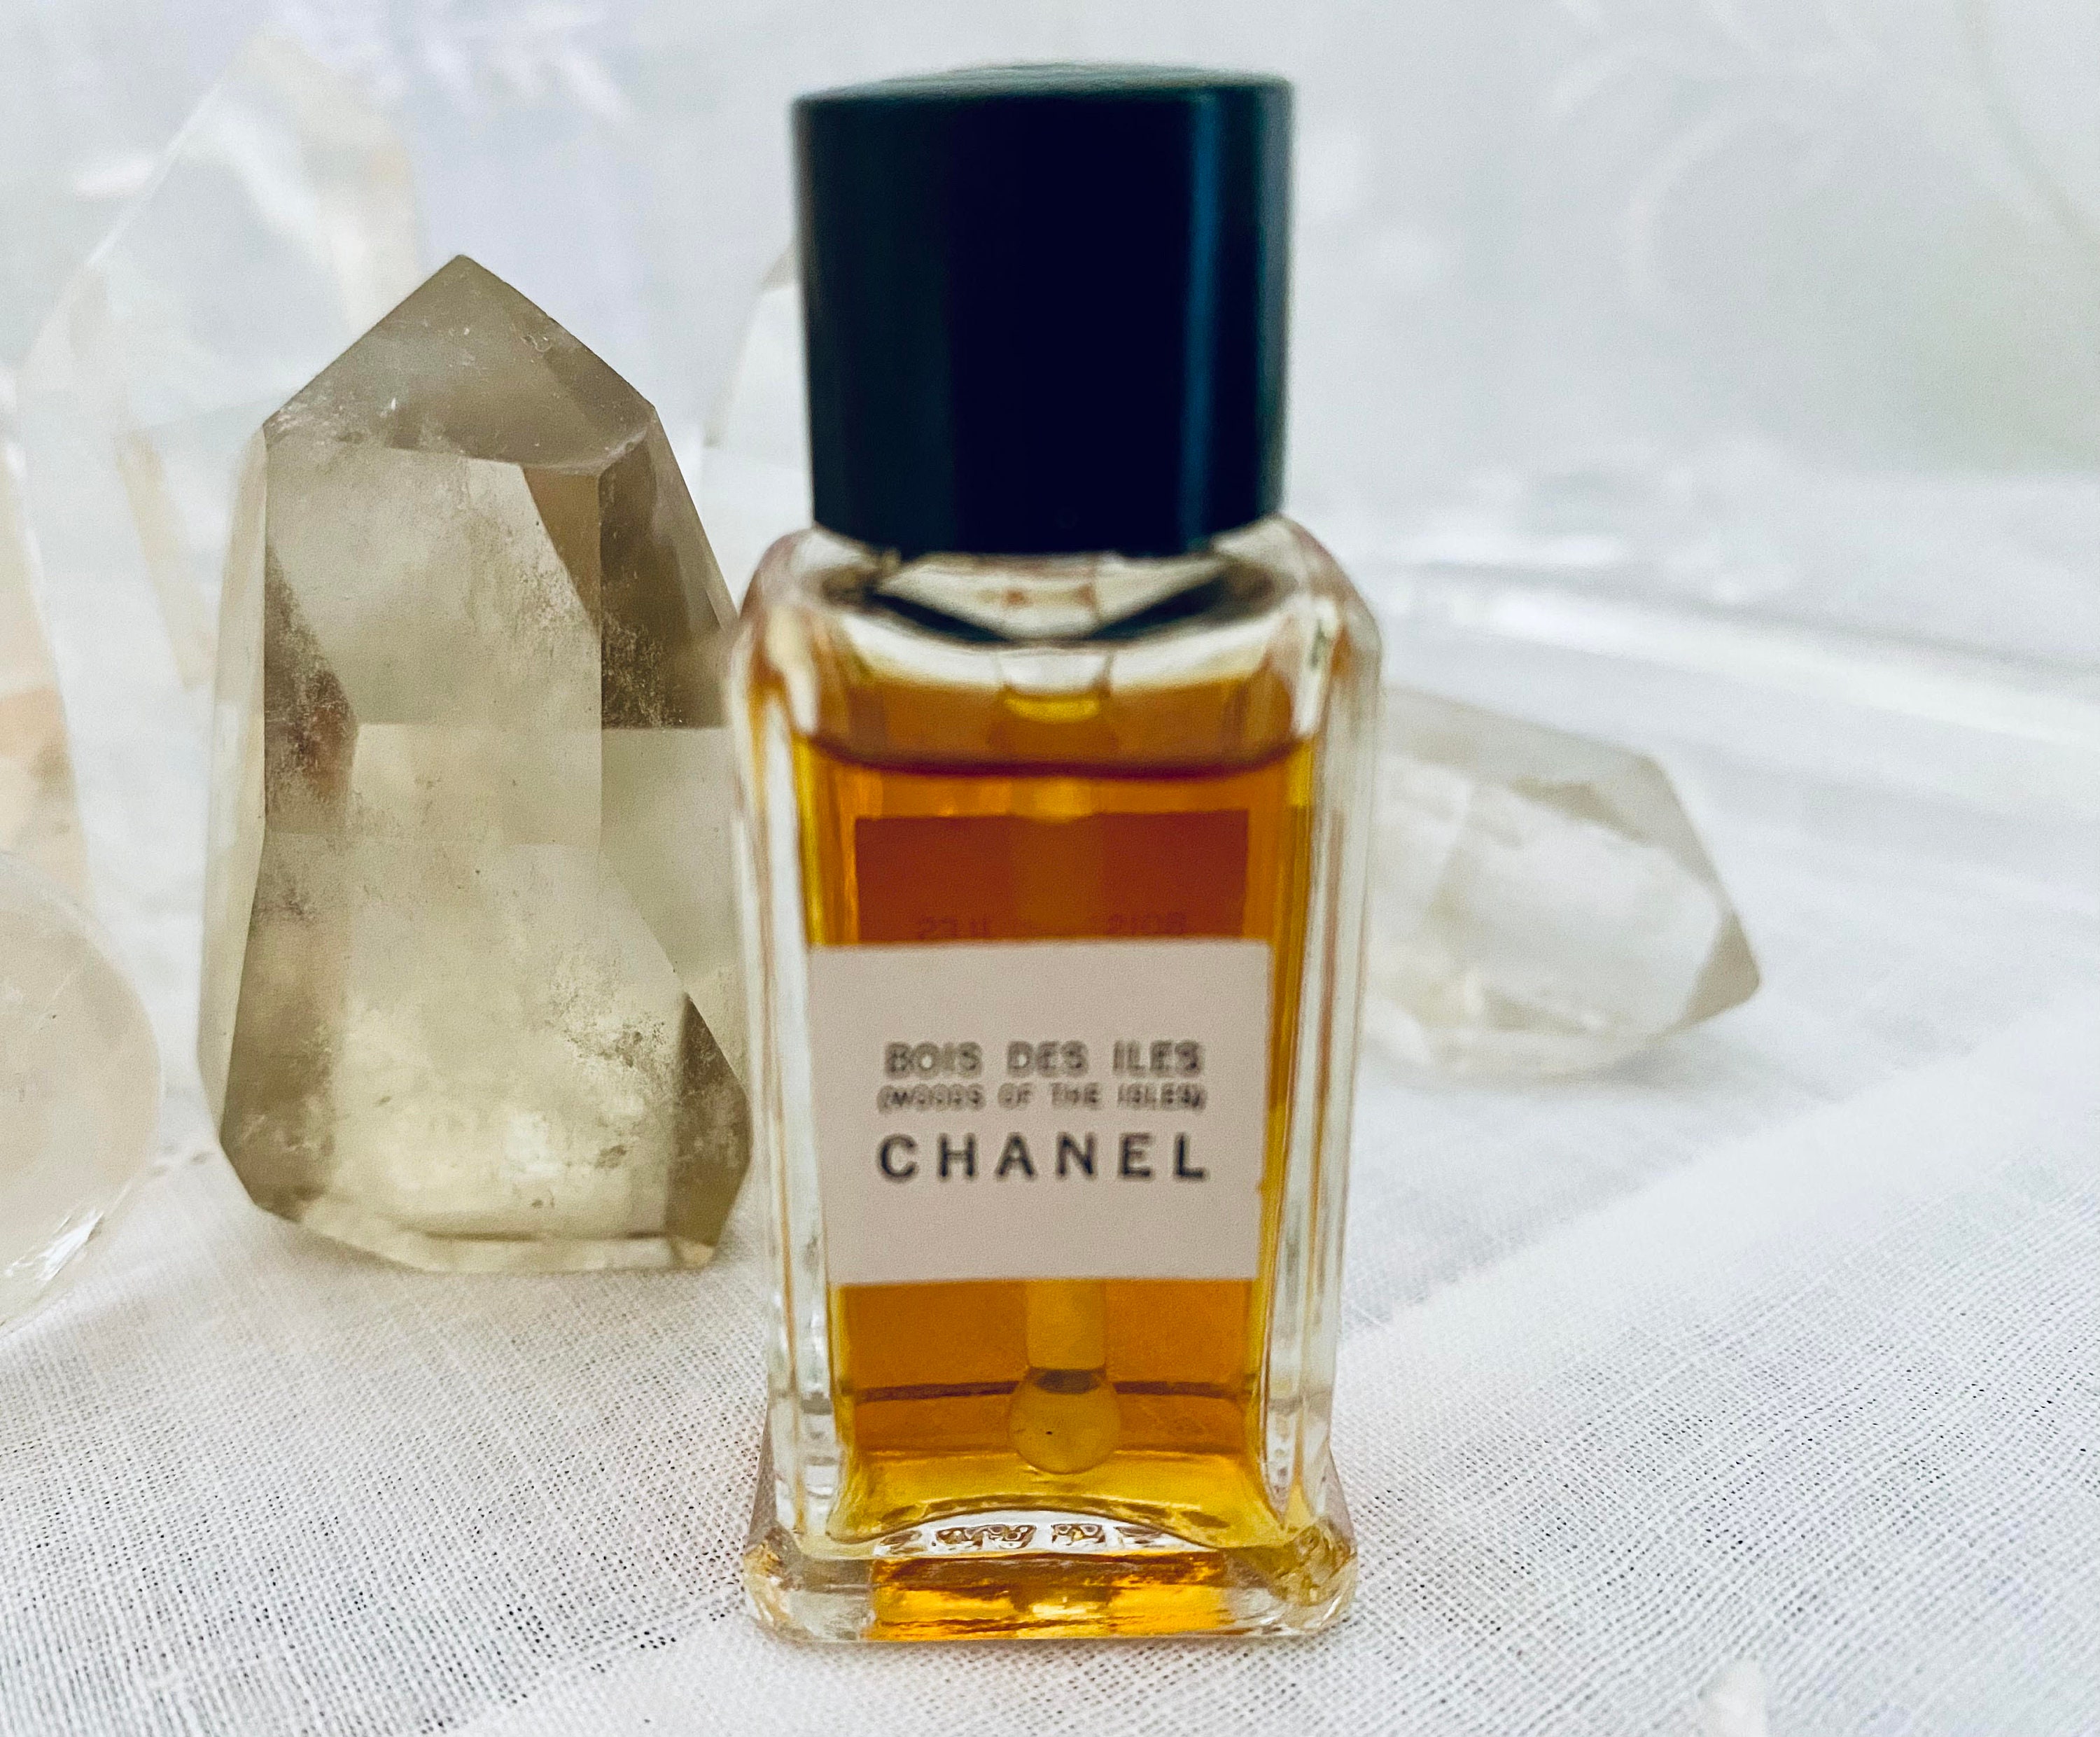 Chanel No. 22 DECANTED SAMPLE From Flacon Parfum Extrait -  Israel